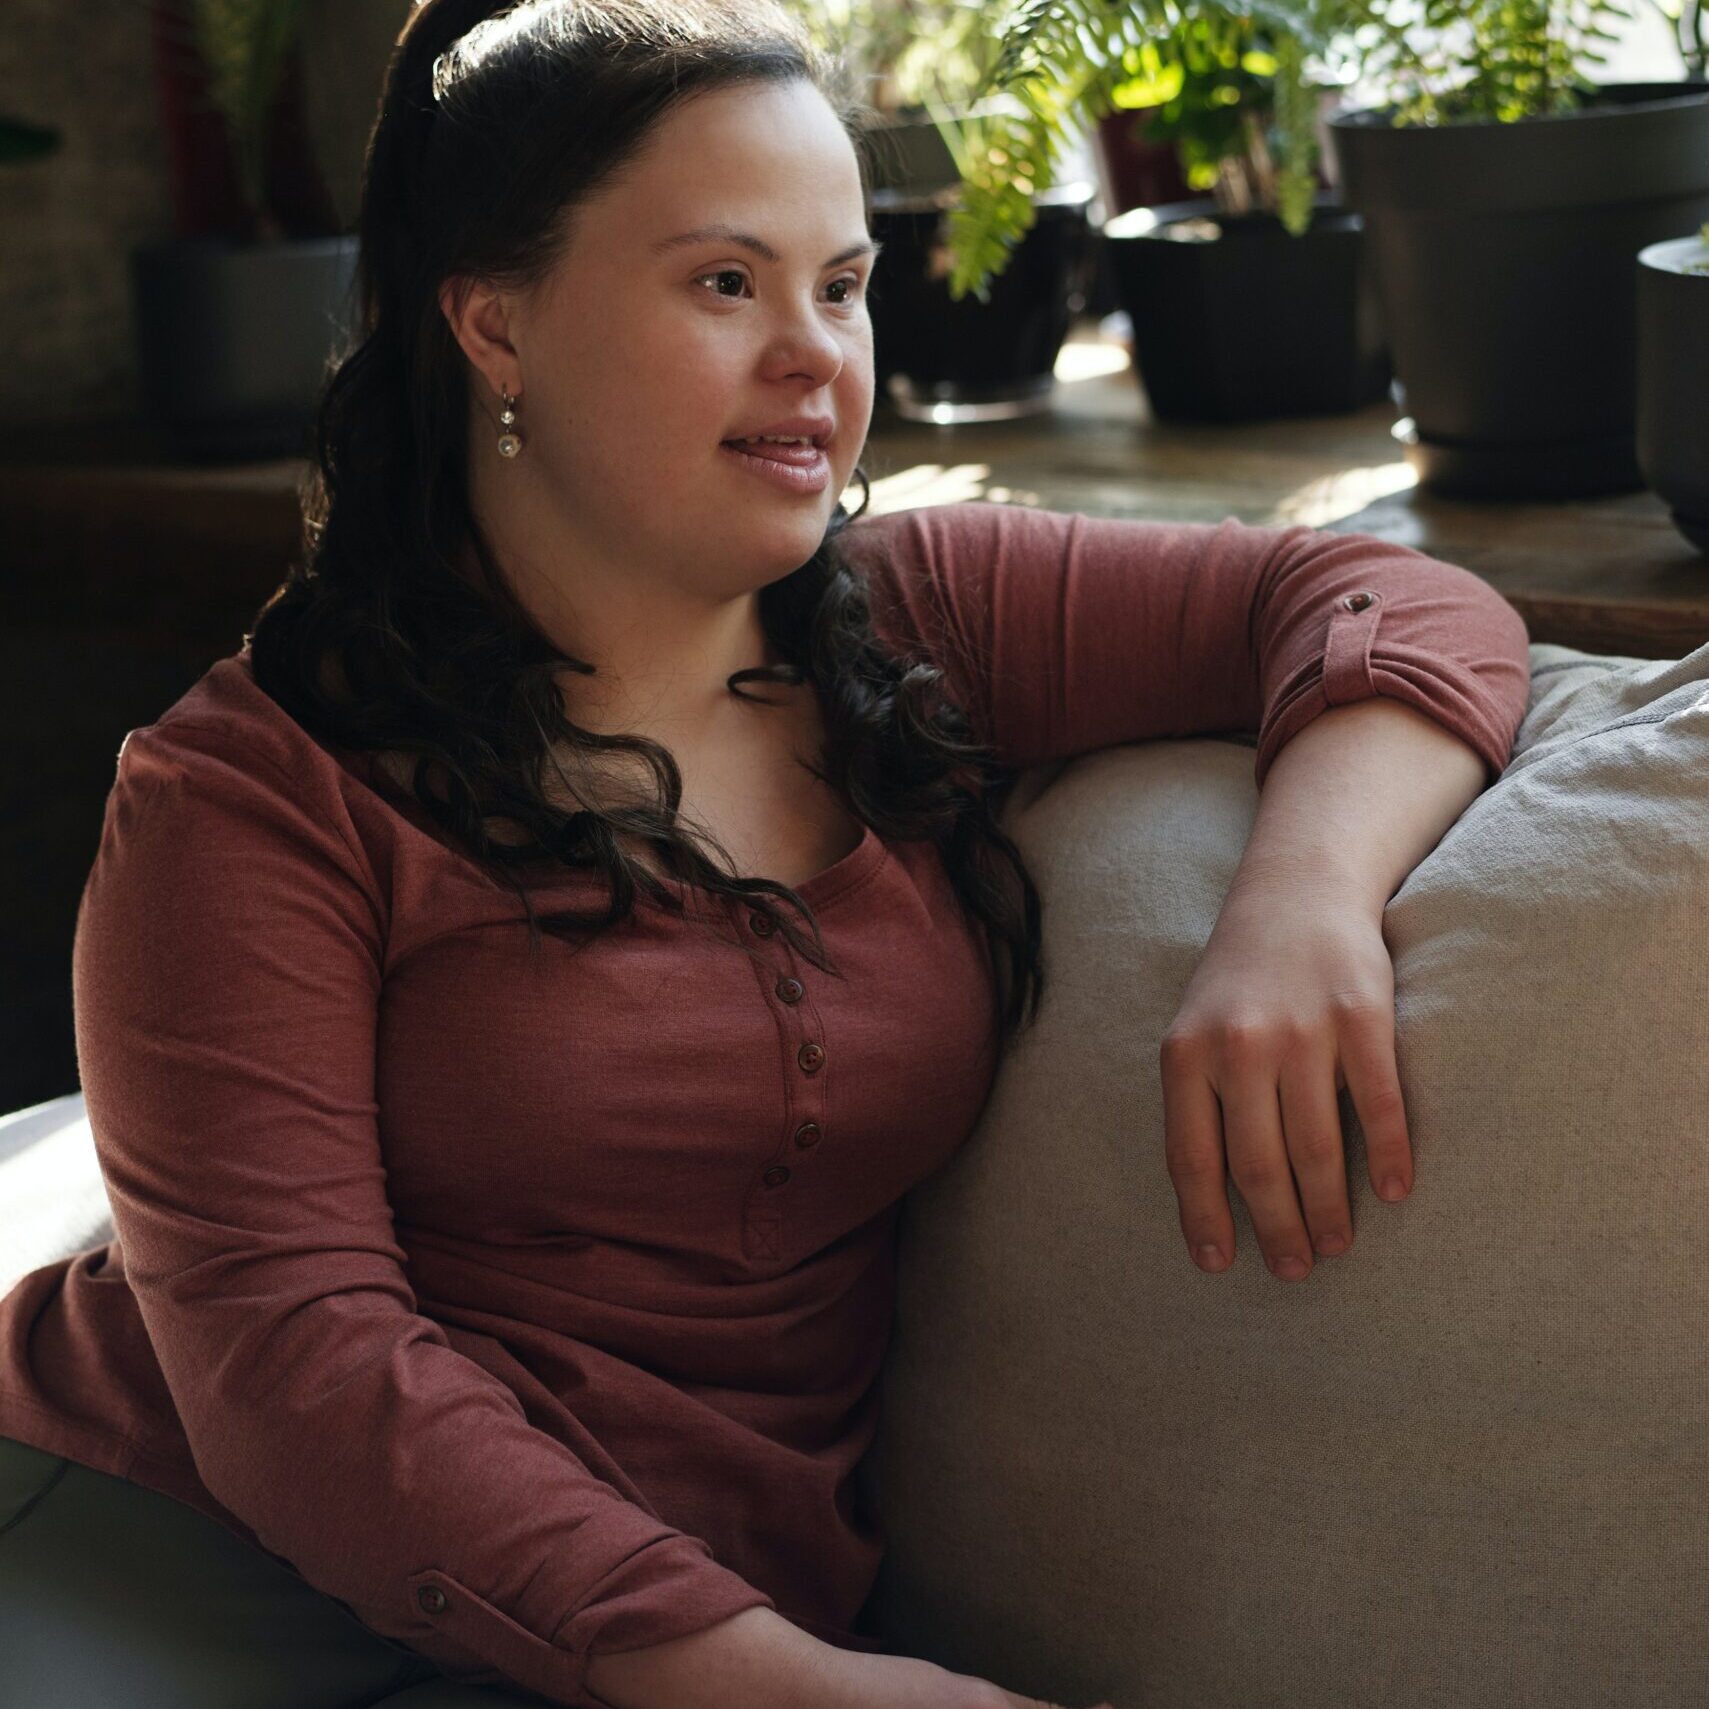 Down Syndrome Woman on Couch Pexels